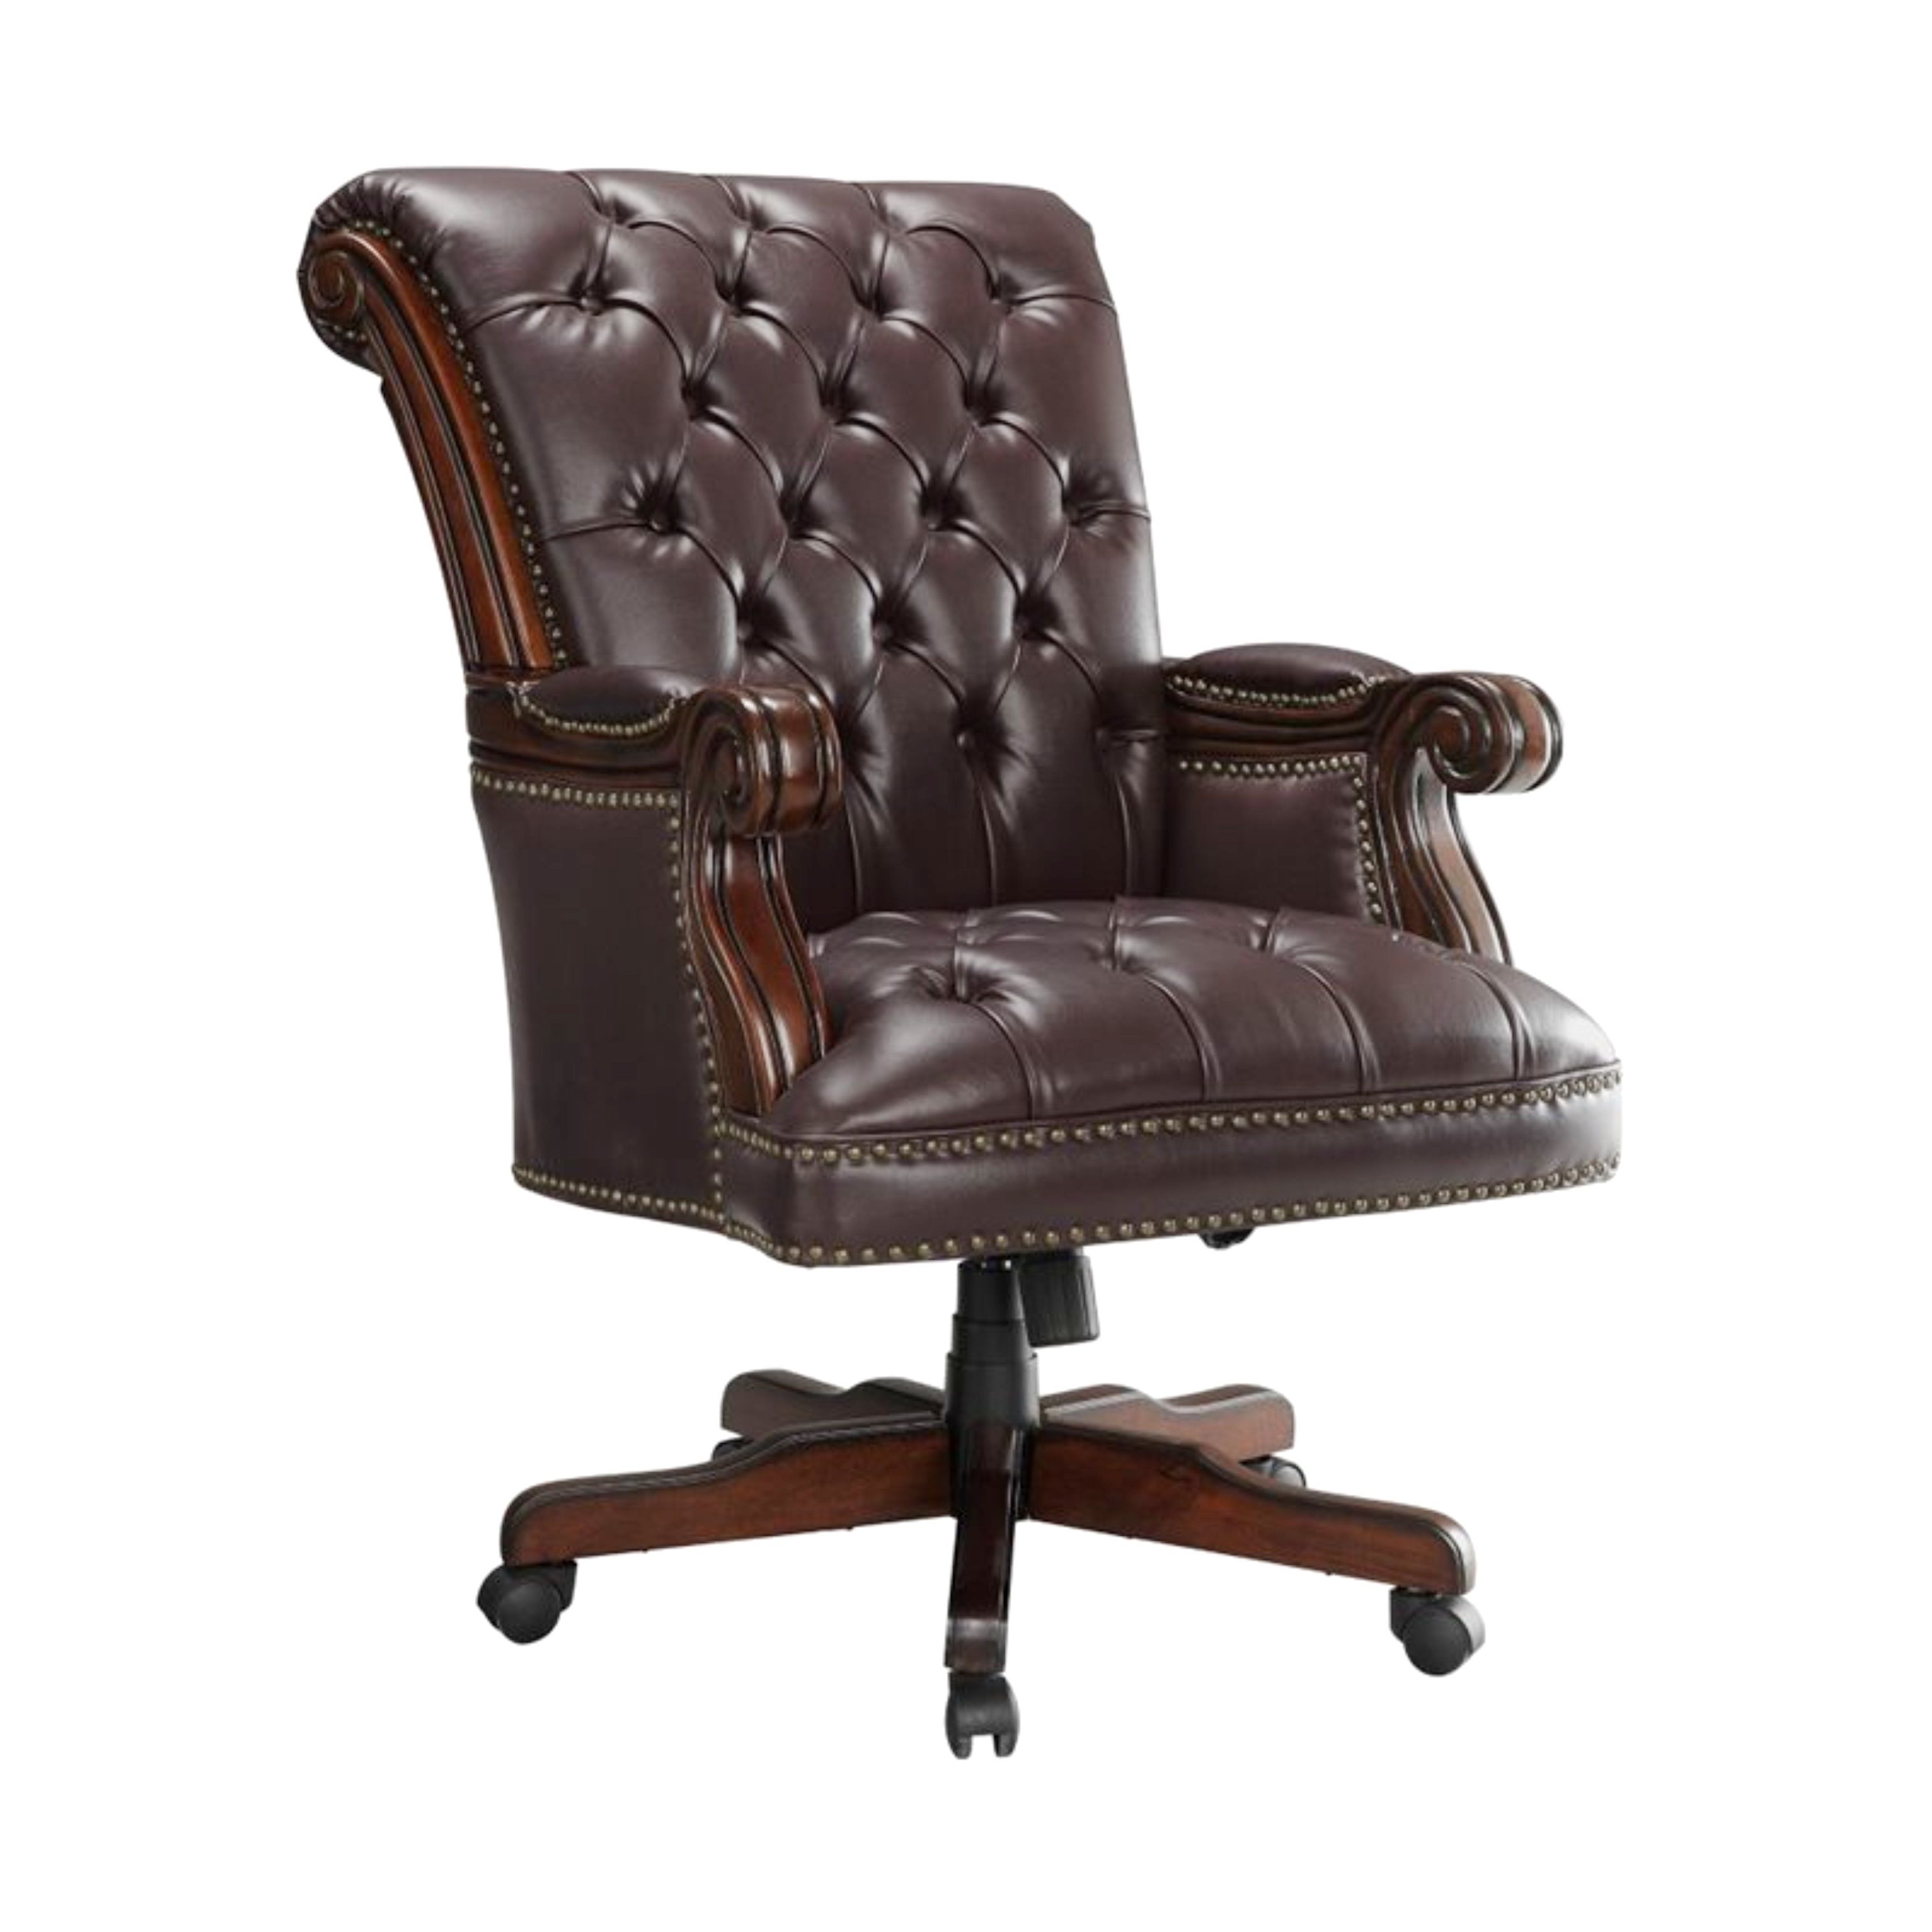 Plush Rolled Back Design Traditional Button Tufted Executive Regarding Most Recent Nailhead Executive Office Chairs (View 1 of 20)